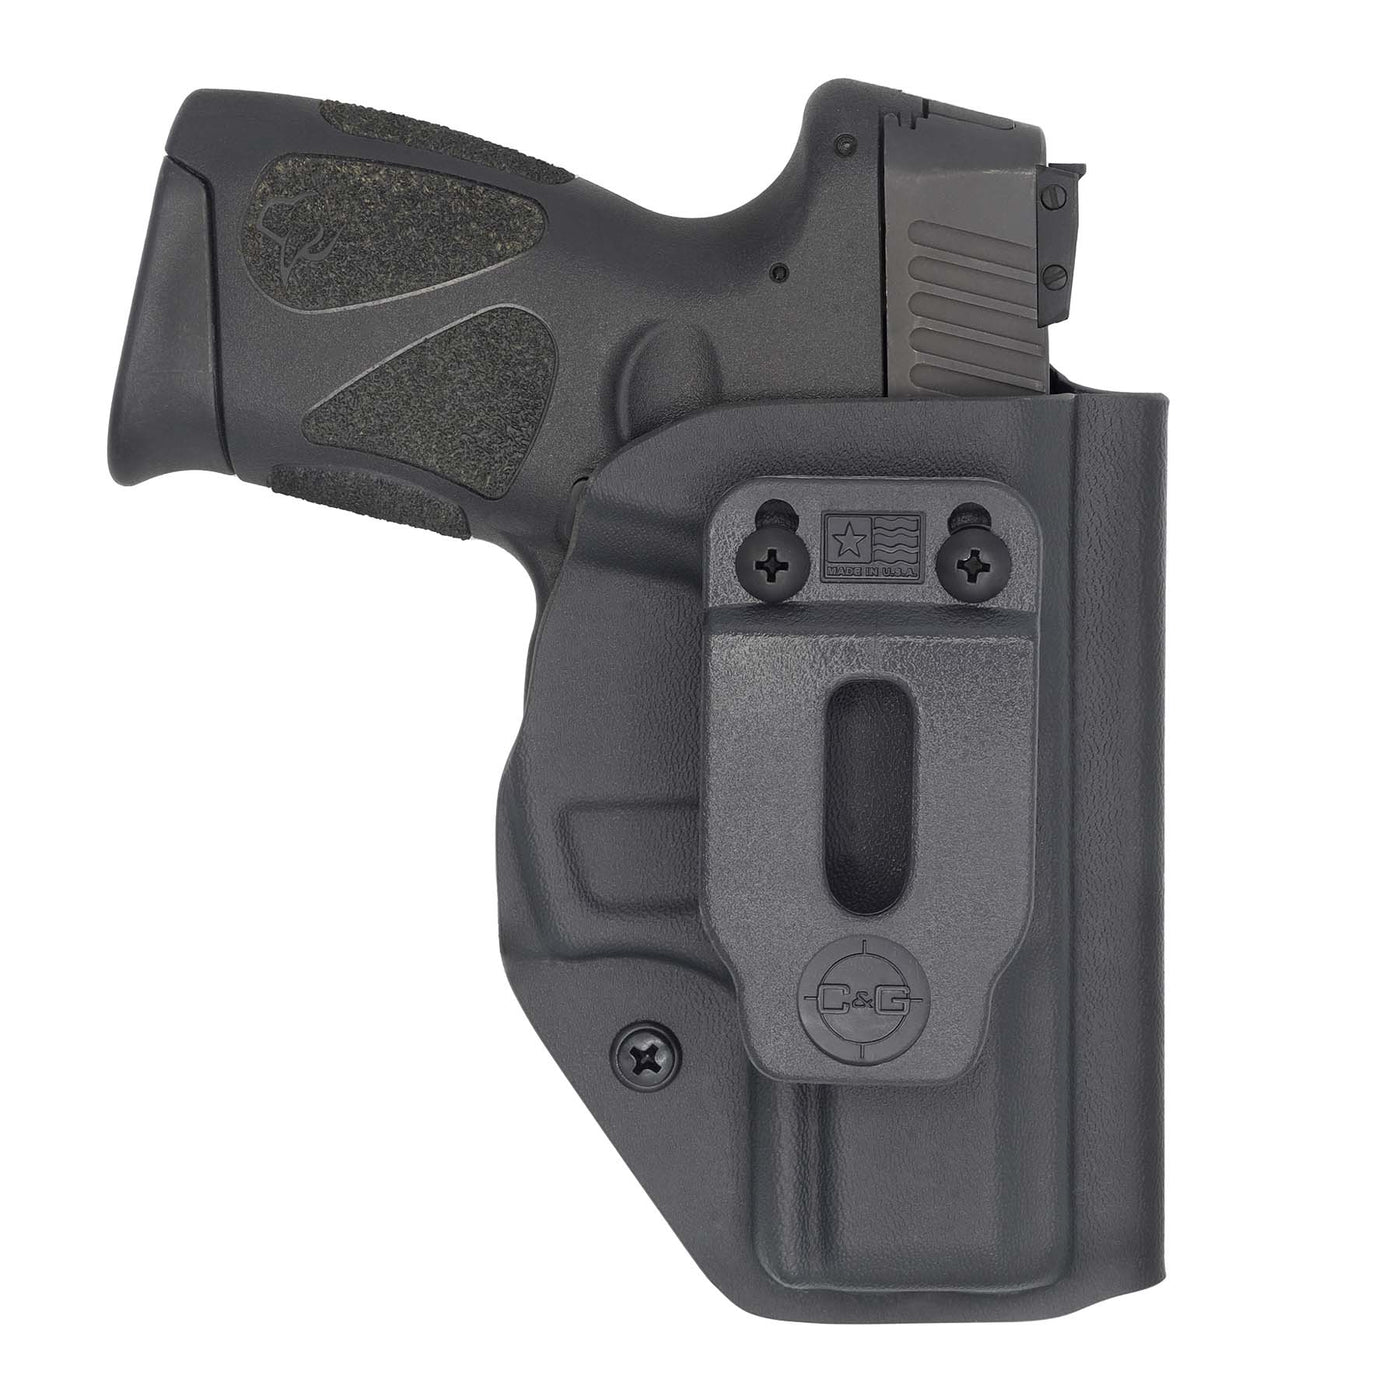 C&G Holsters IWB inside the waistband Holster for the Taurus G2C holstered position